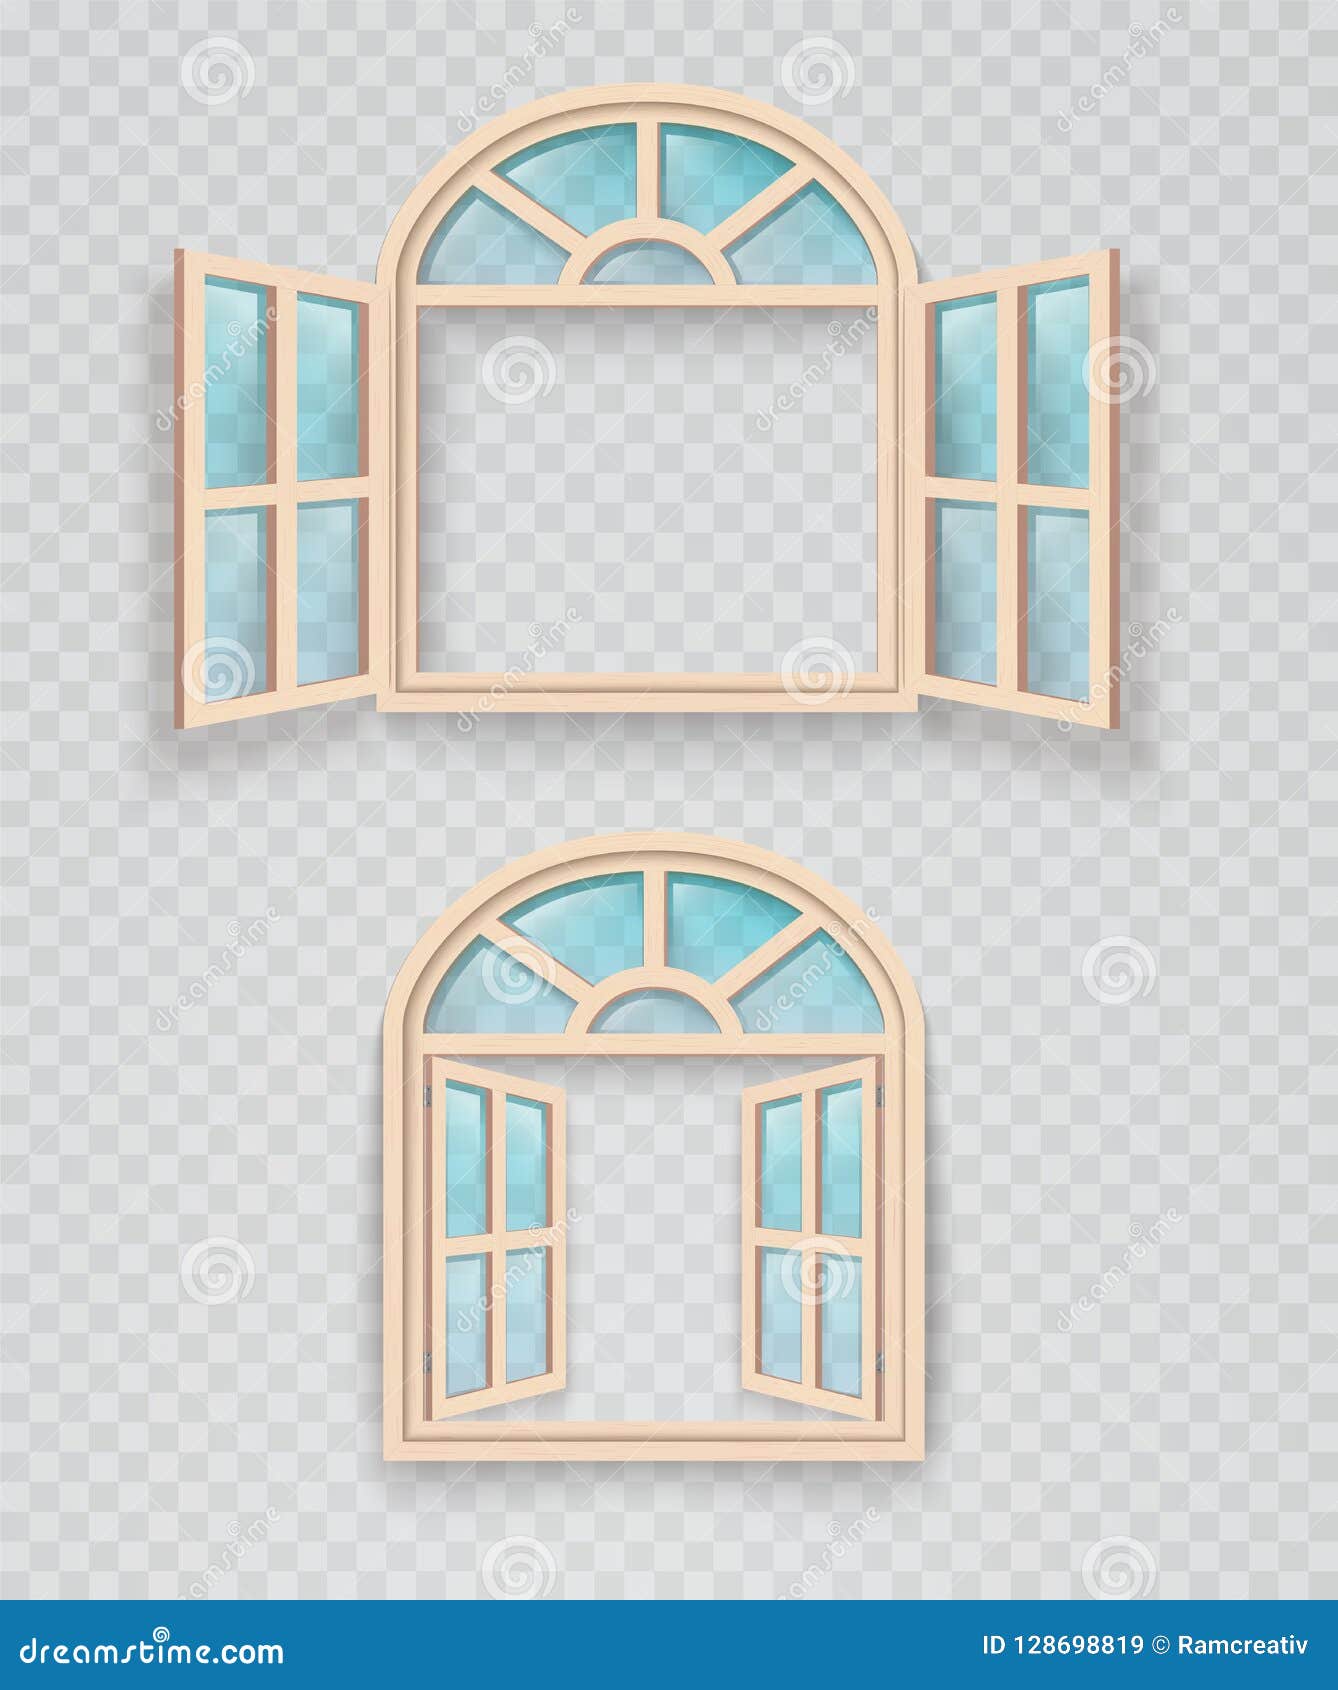 Open And Closed Wooden Window On A Transparent Background